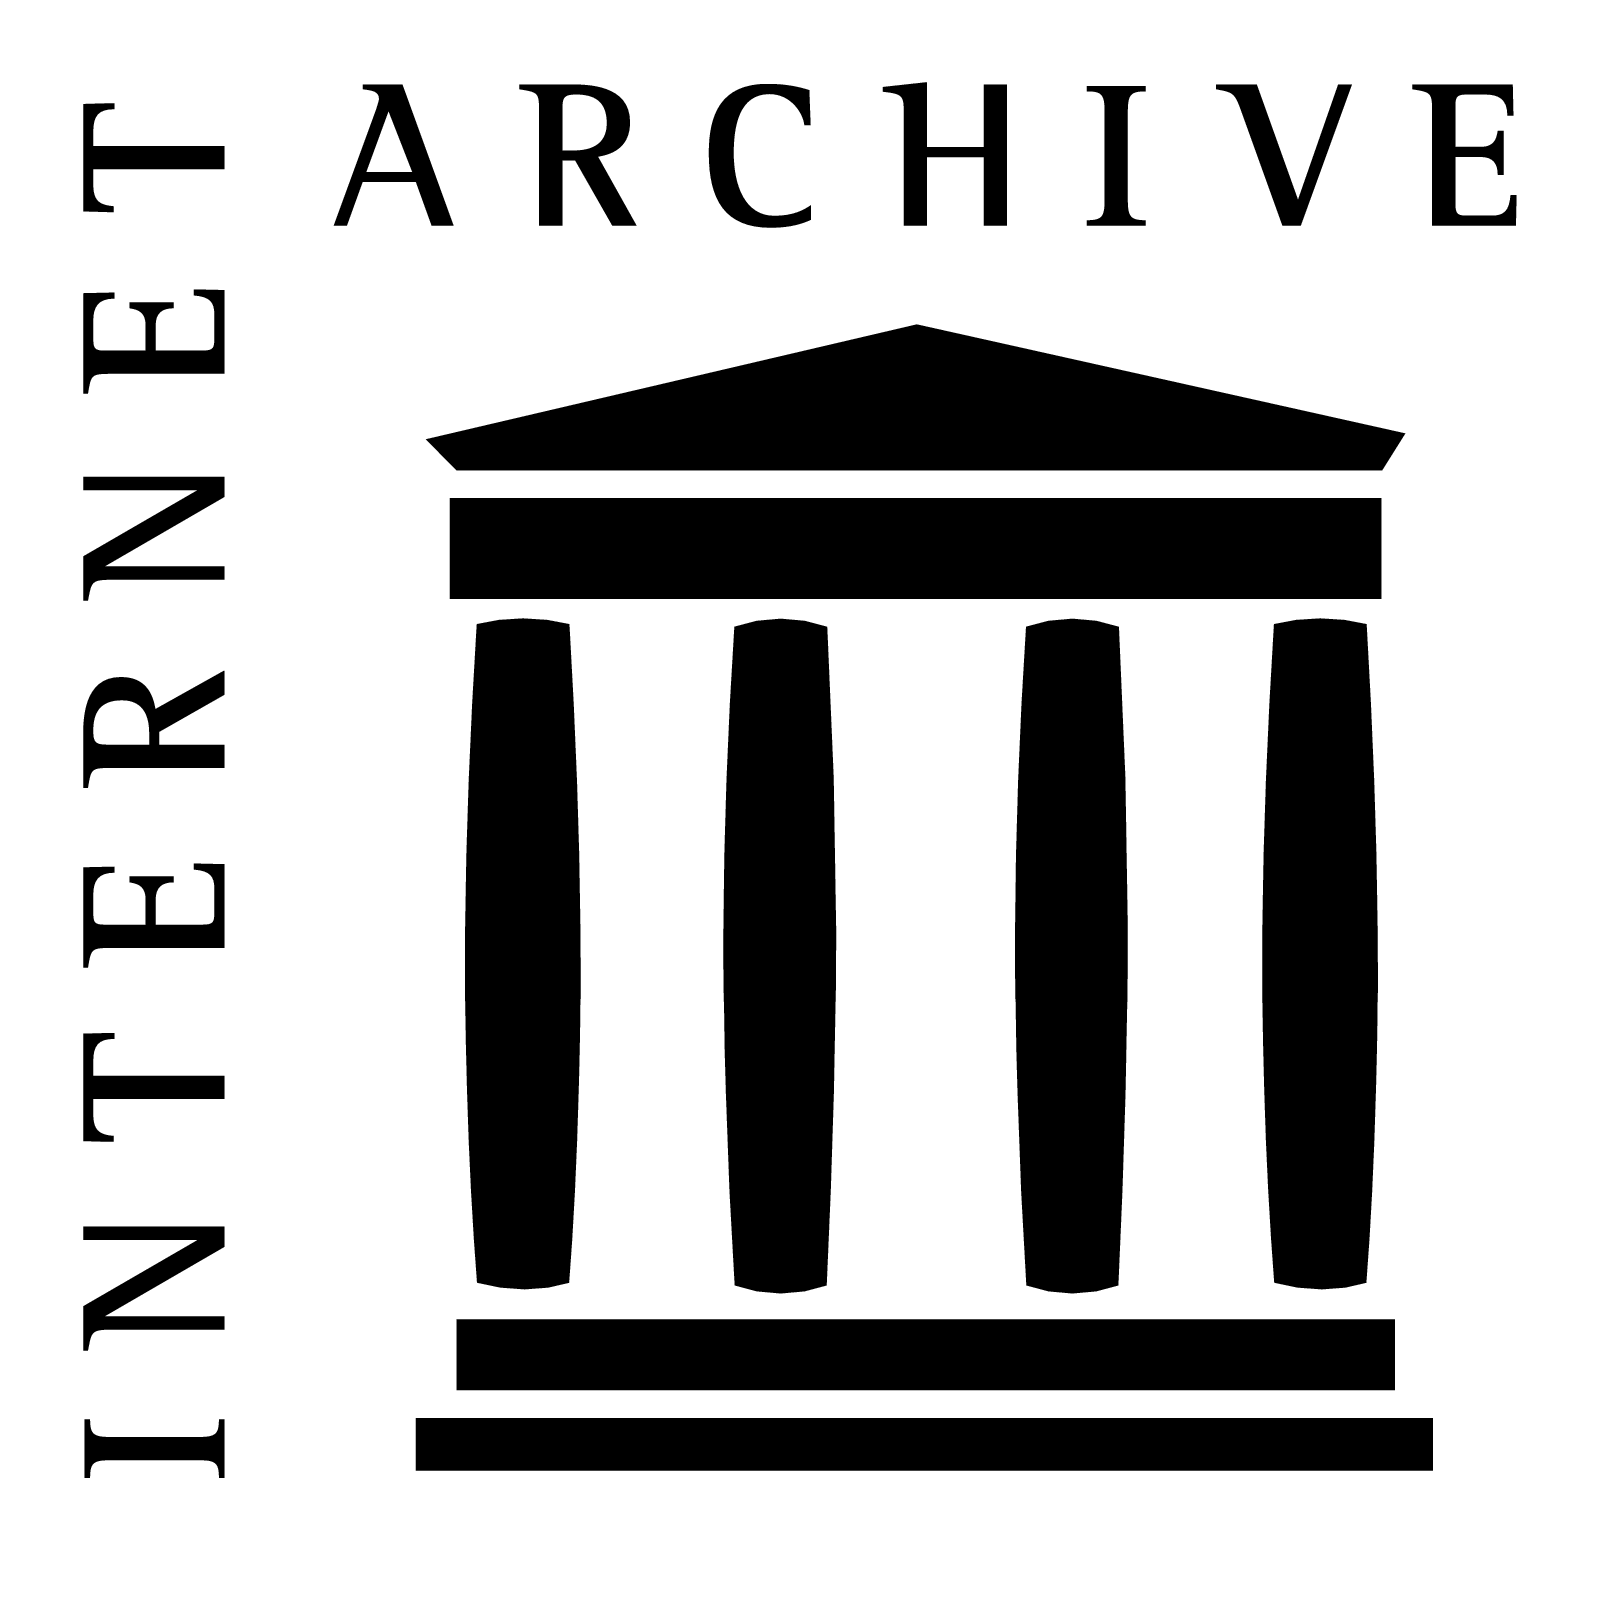 Archives Logo - File:Internet Archive logo and wordmark.png - Wikimedia Commons